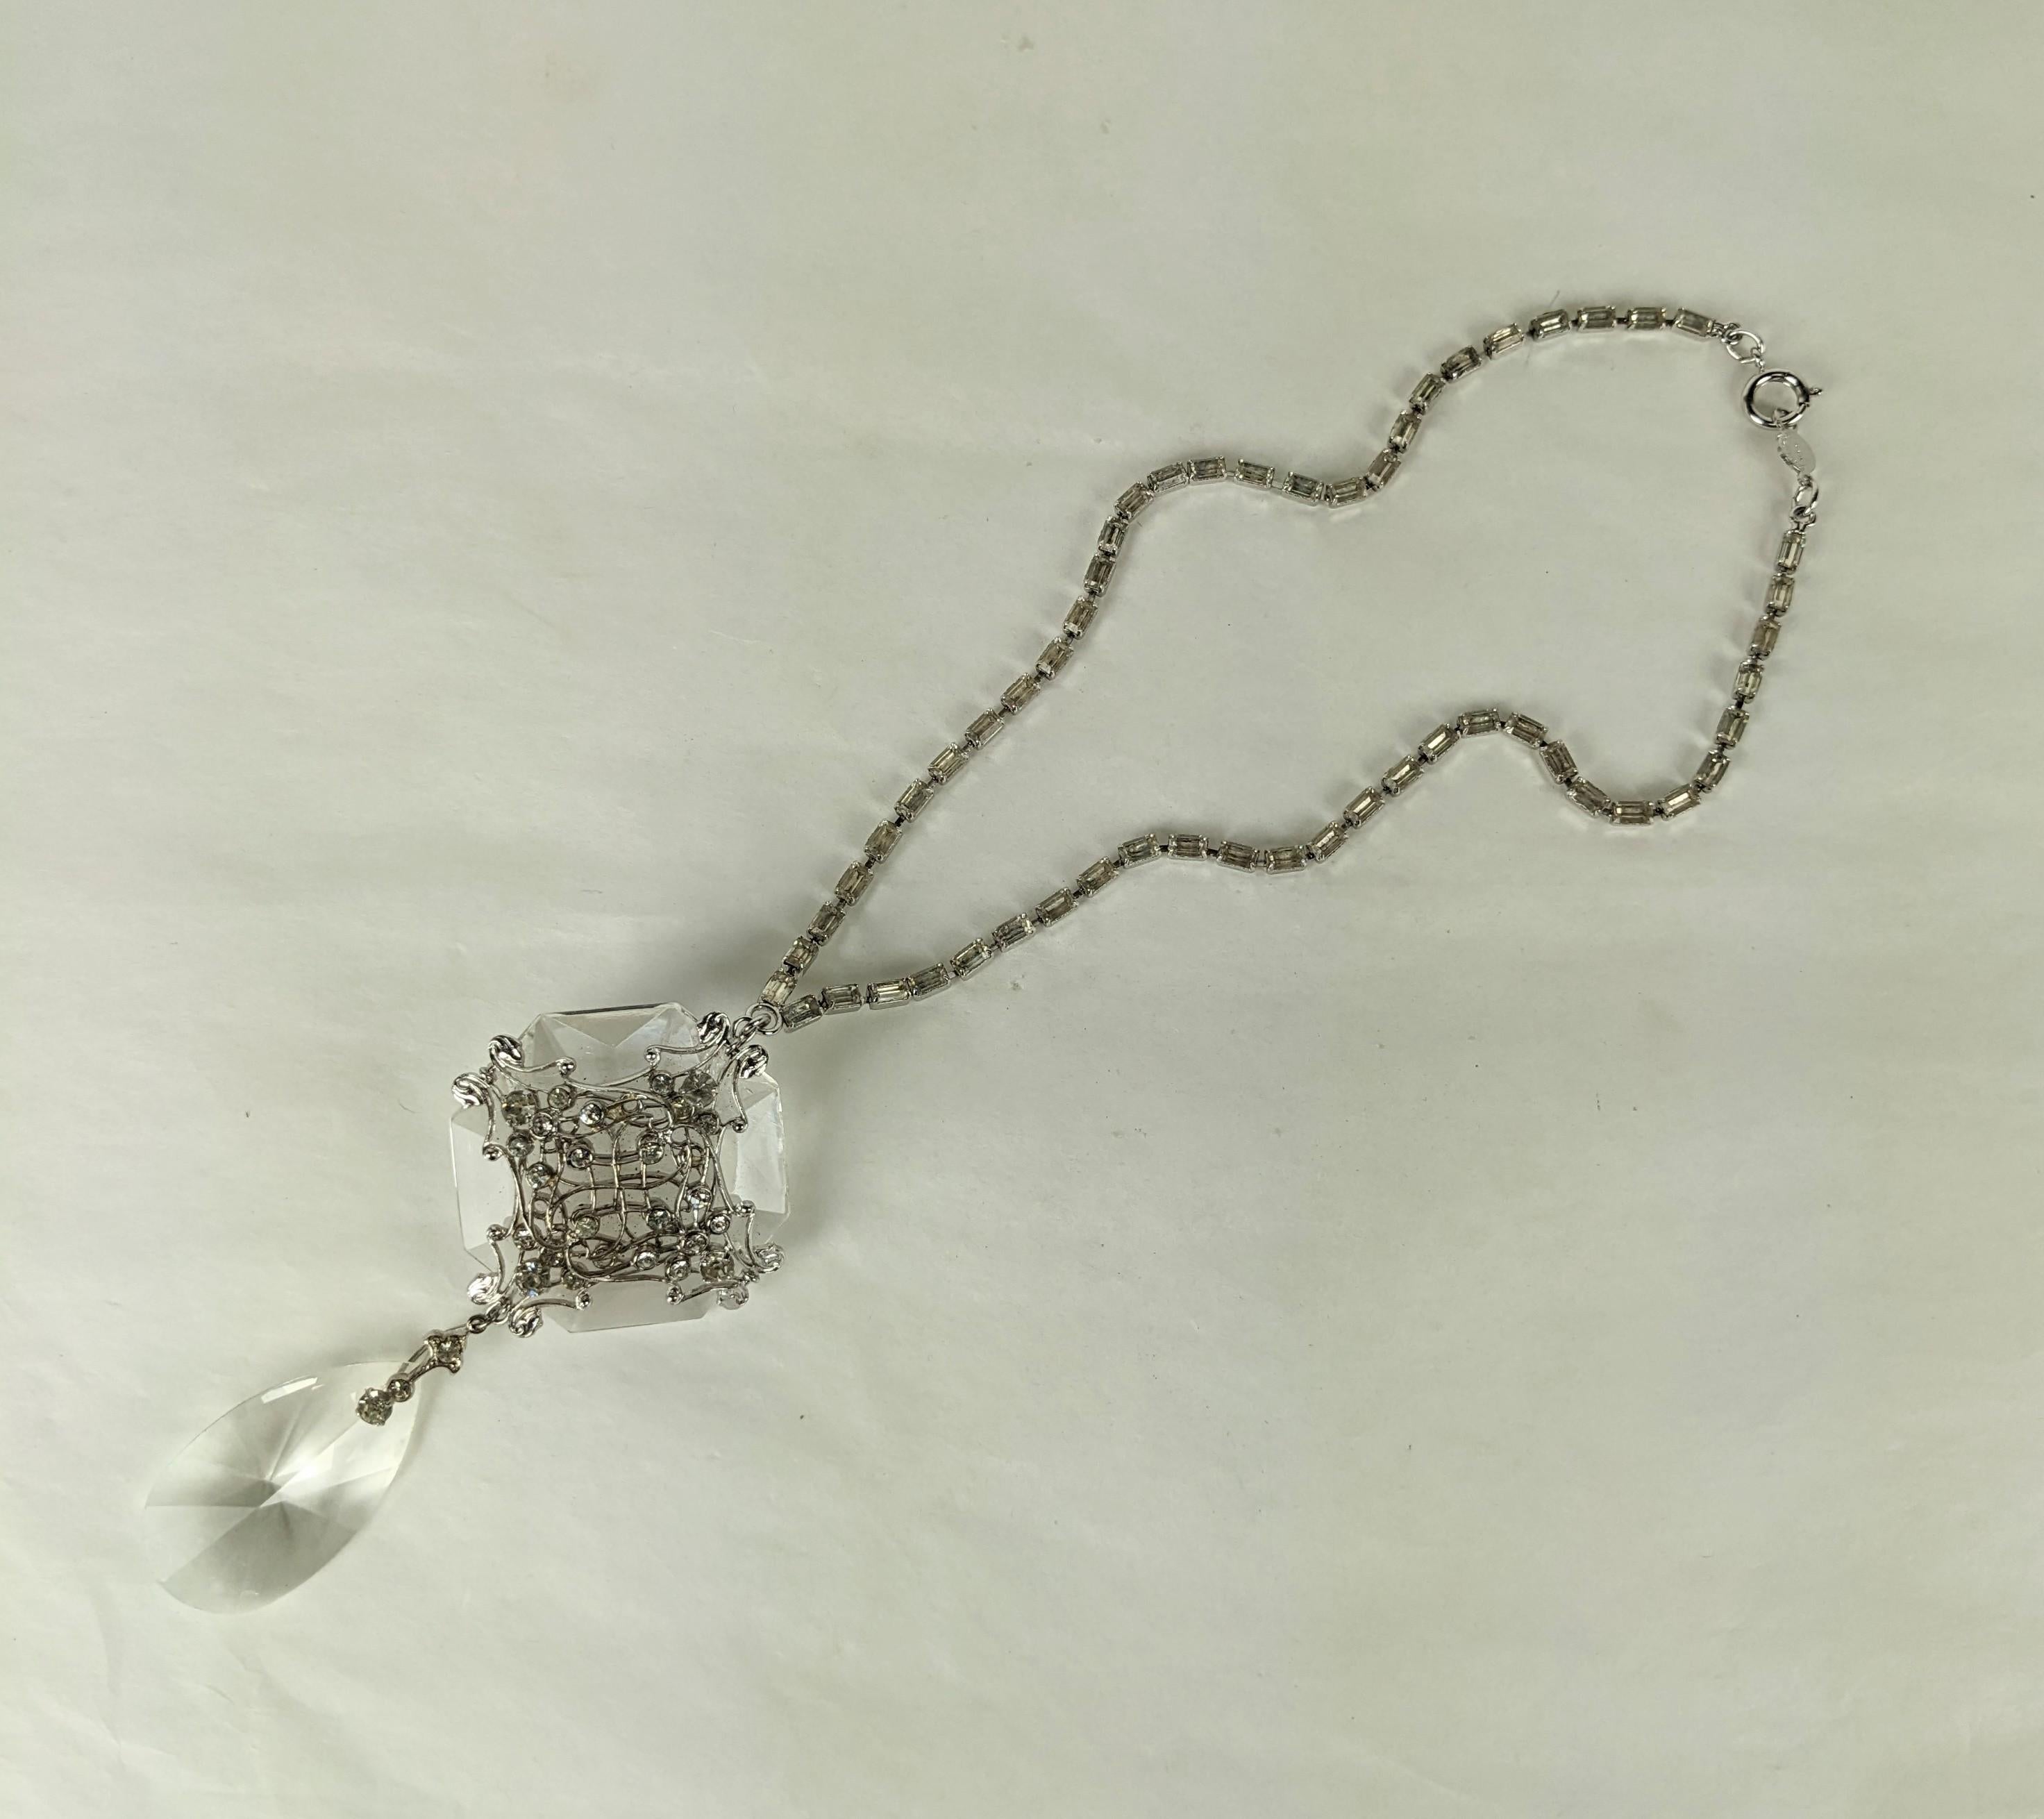 Unusual Chandelier Crystal Pendant by Accessocraft from the 1950's. Lucite crystals are mounted onto a silvered filigree set with crystal stones. Necklace of flexible baguette crystals. 1950's USA. Necklace 16